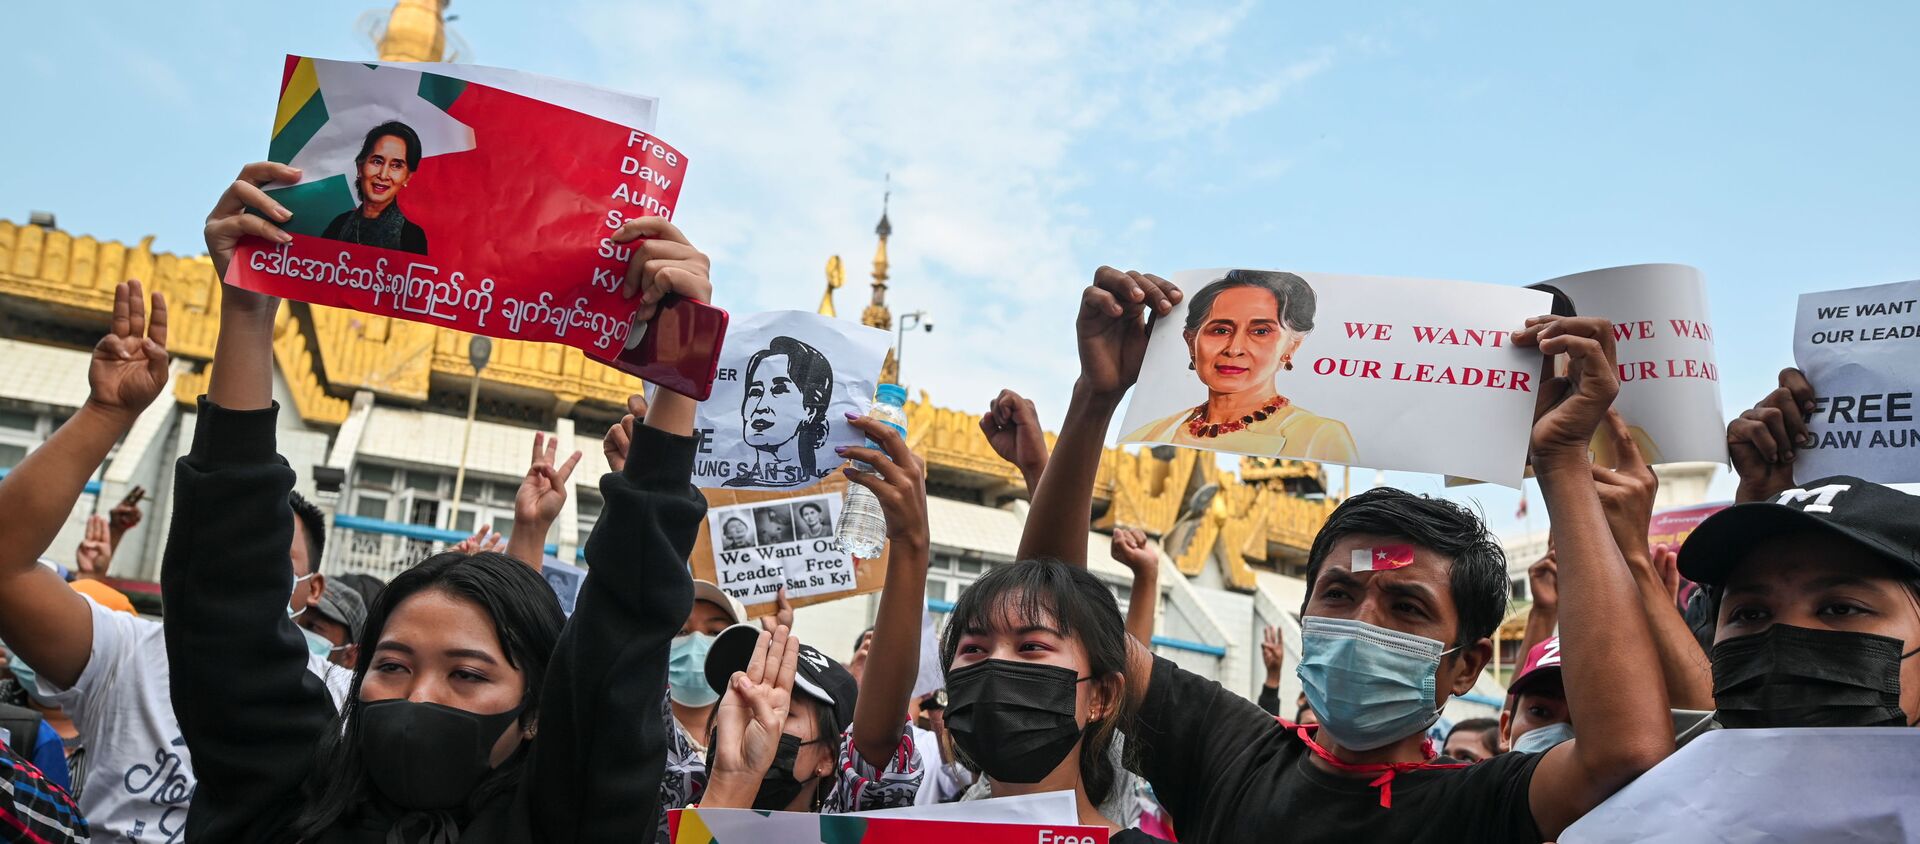 People hold placards depicting elected leader Aung San Suu Kyi during a rally to demand her release and protest against the military coup, in Yangon, Myanmar, February 8, 2021 - Sputnik International, 1920, 11.02.2021